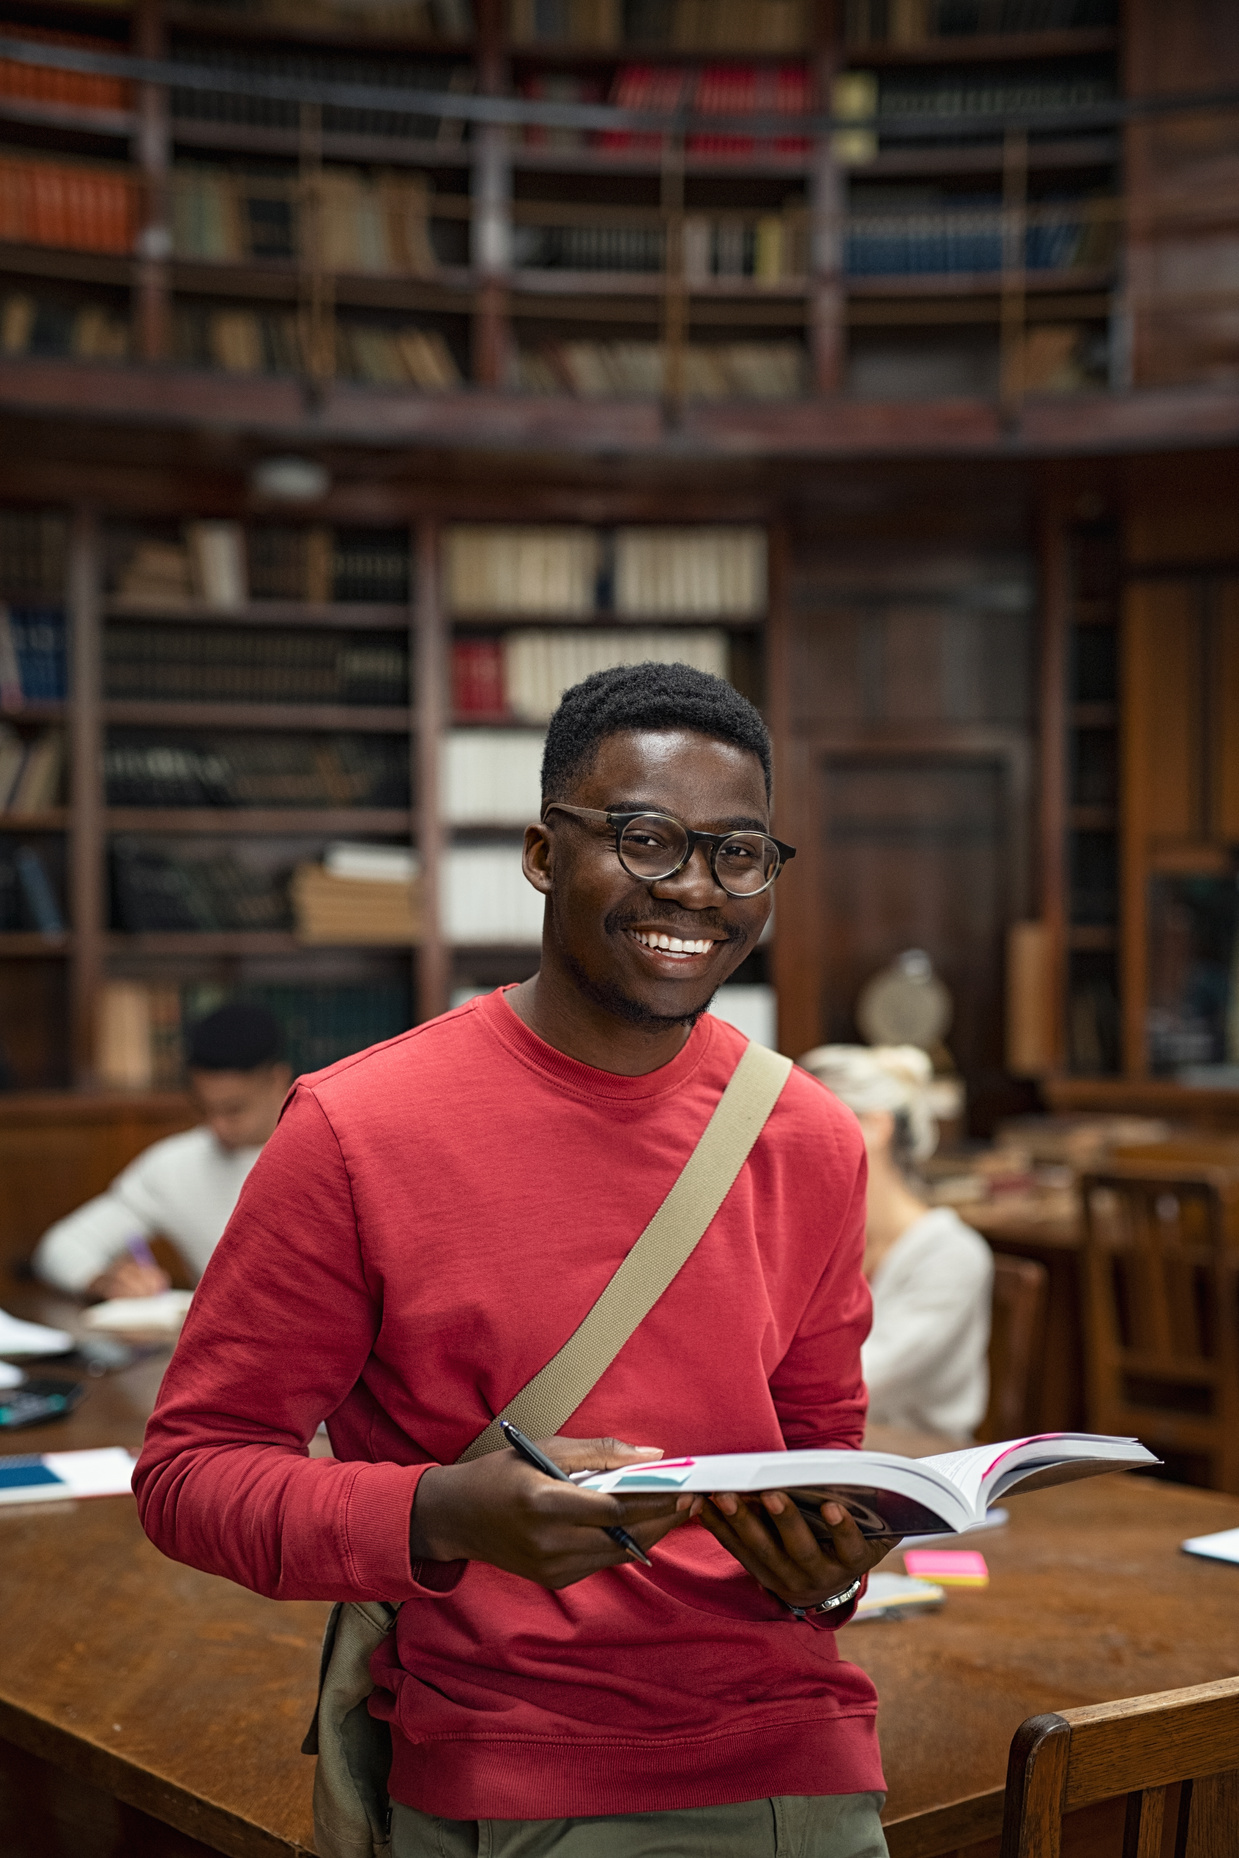 University African Student in Library